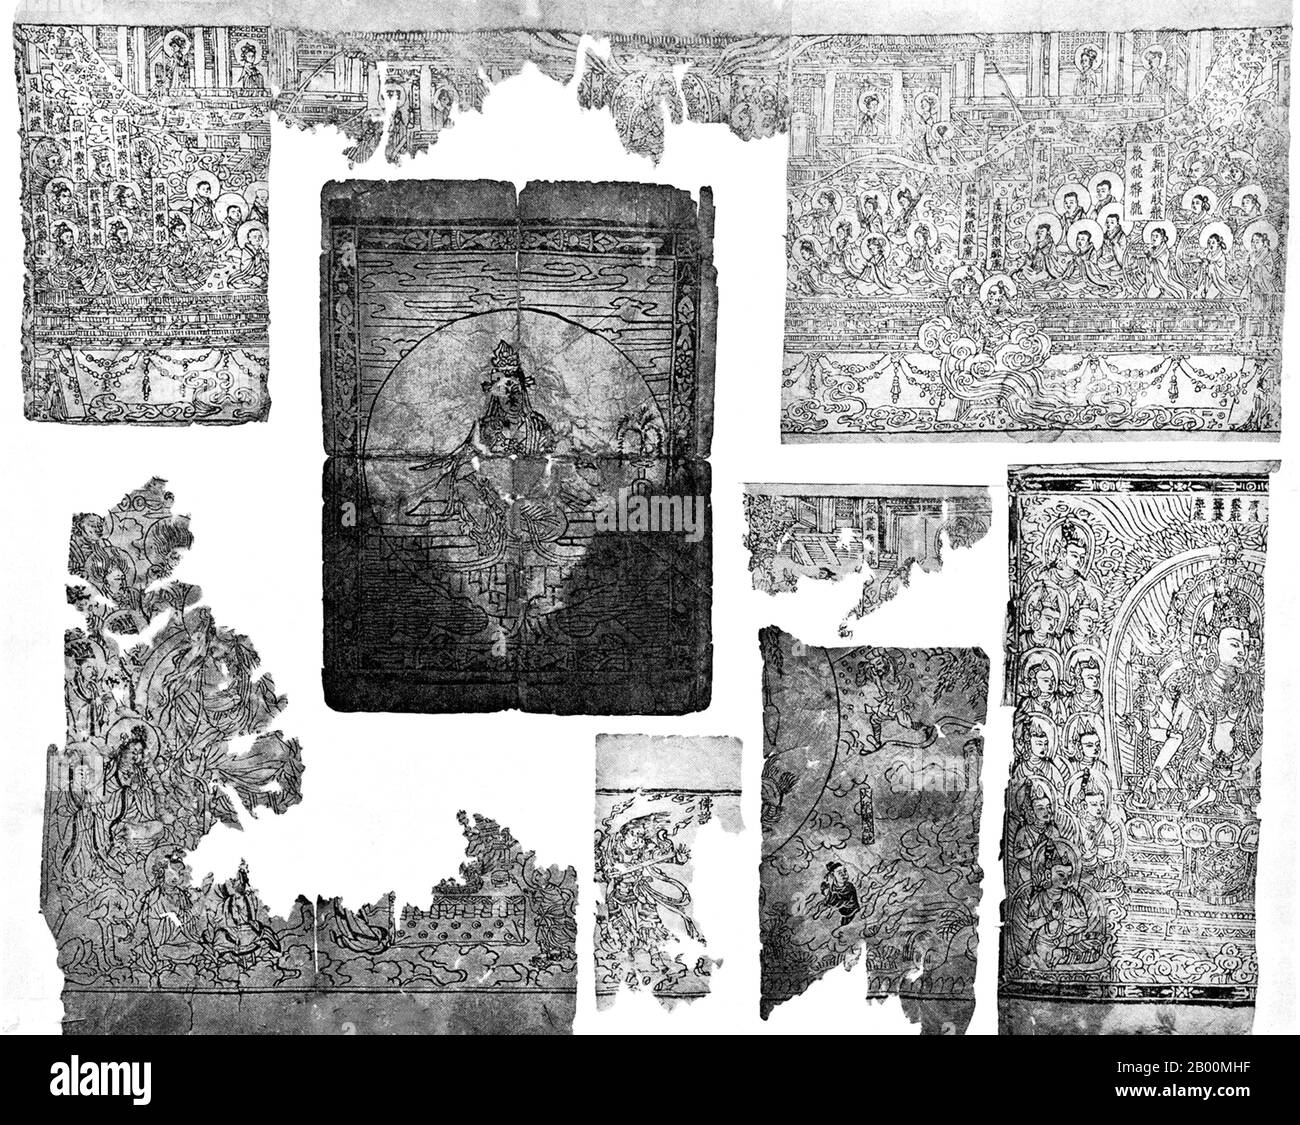 China: Block prints on paper from Khara-Khoto, Inner Mongolia.  Khara-Khoto is a medieval Tangut city in the Ejin khoshuu of Alxa League, in western Inner Mongolia, near the former Gashun Lake. It has been identified as the city of Etzina, which appears in The Travels of Marco Polo. Stock Photo